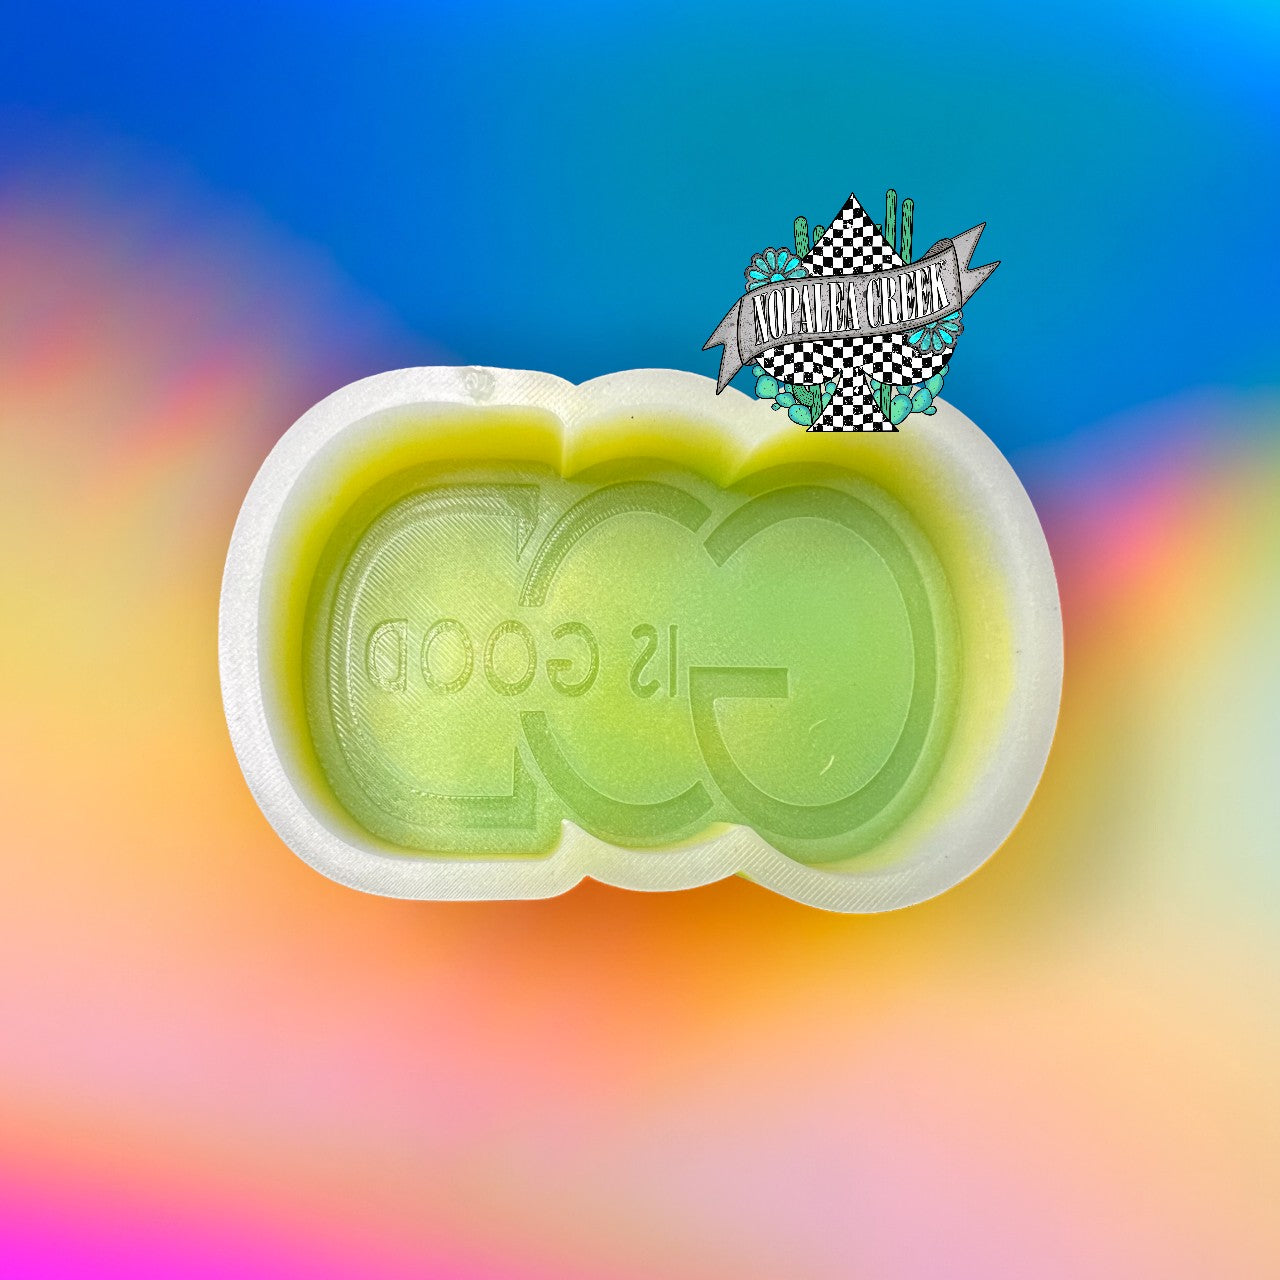 (B141) God is Good Silicone Mold